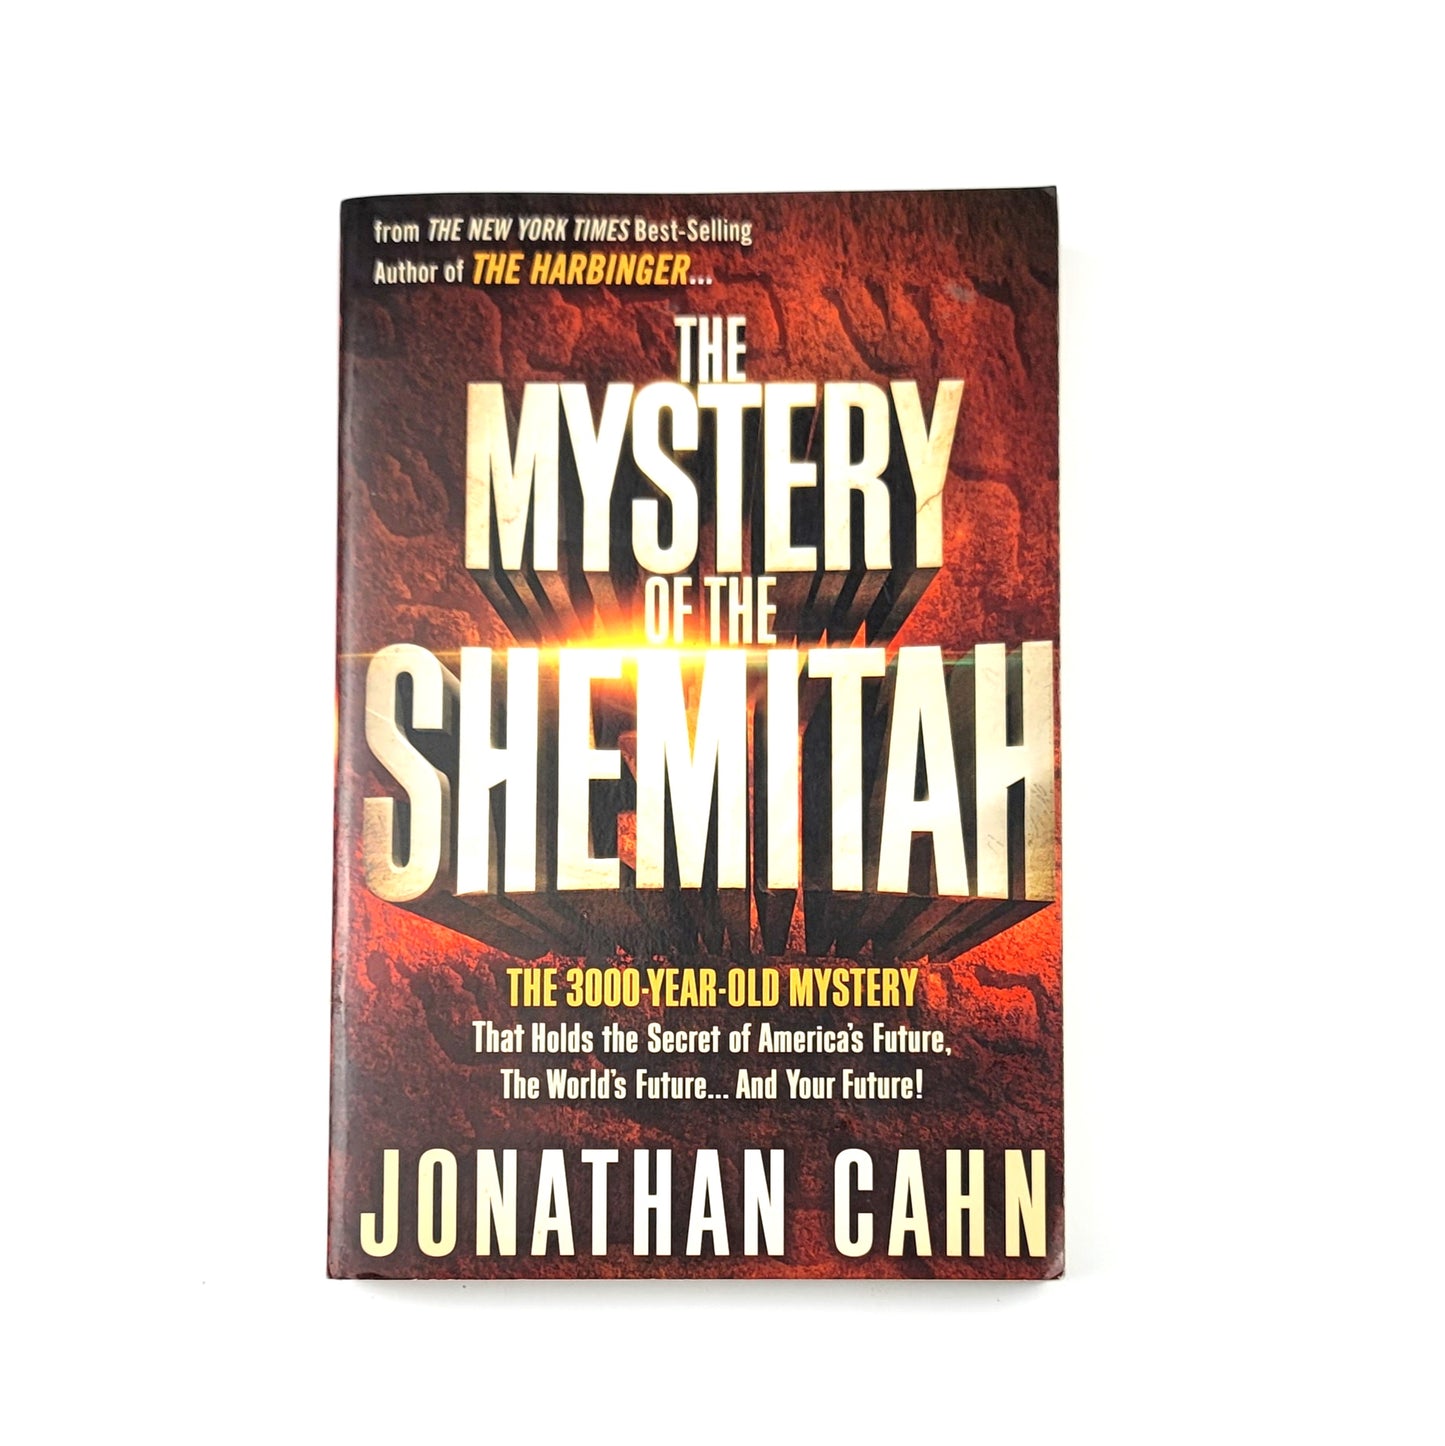 The Mystery of the Shemitah by Jonathan Cahn